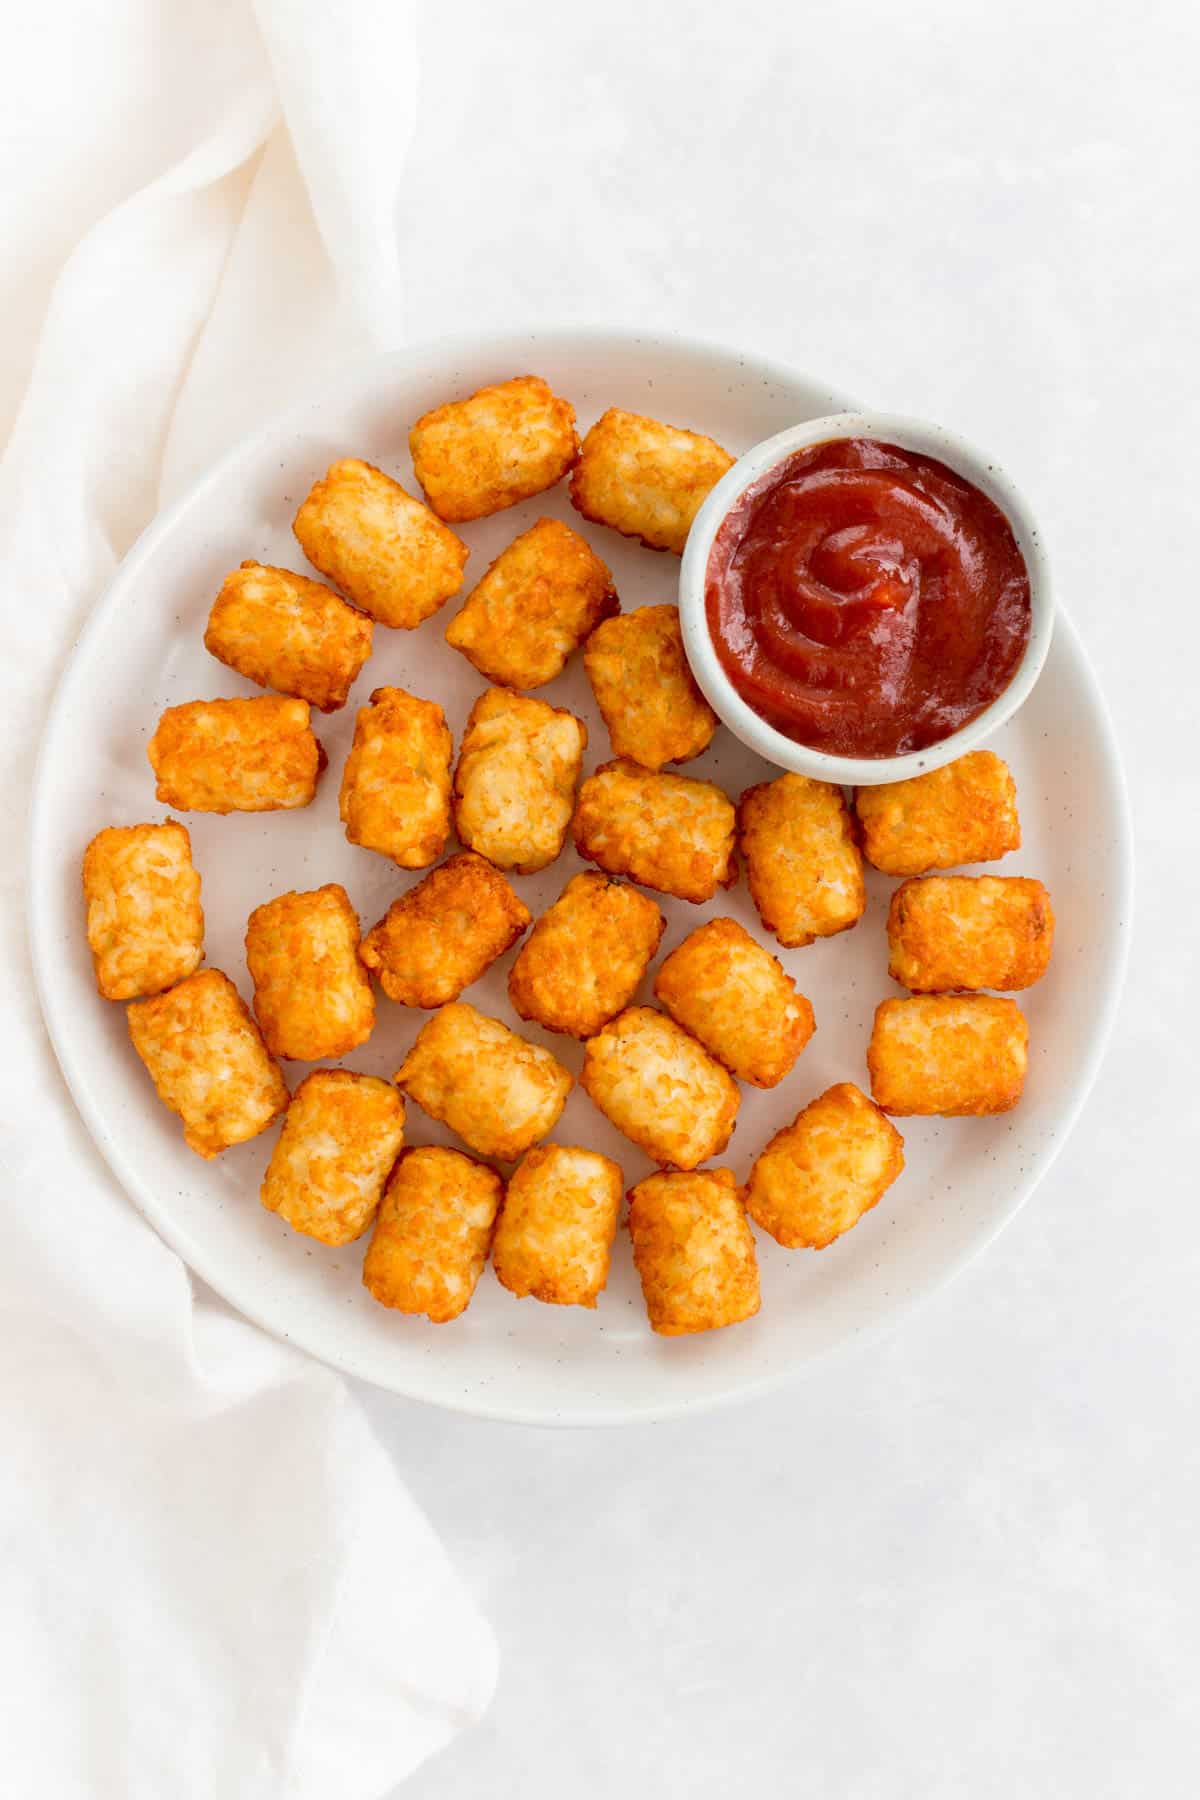 A plate of tater tots with ketchup.